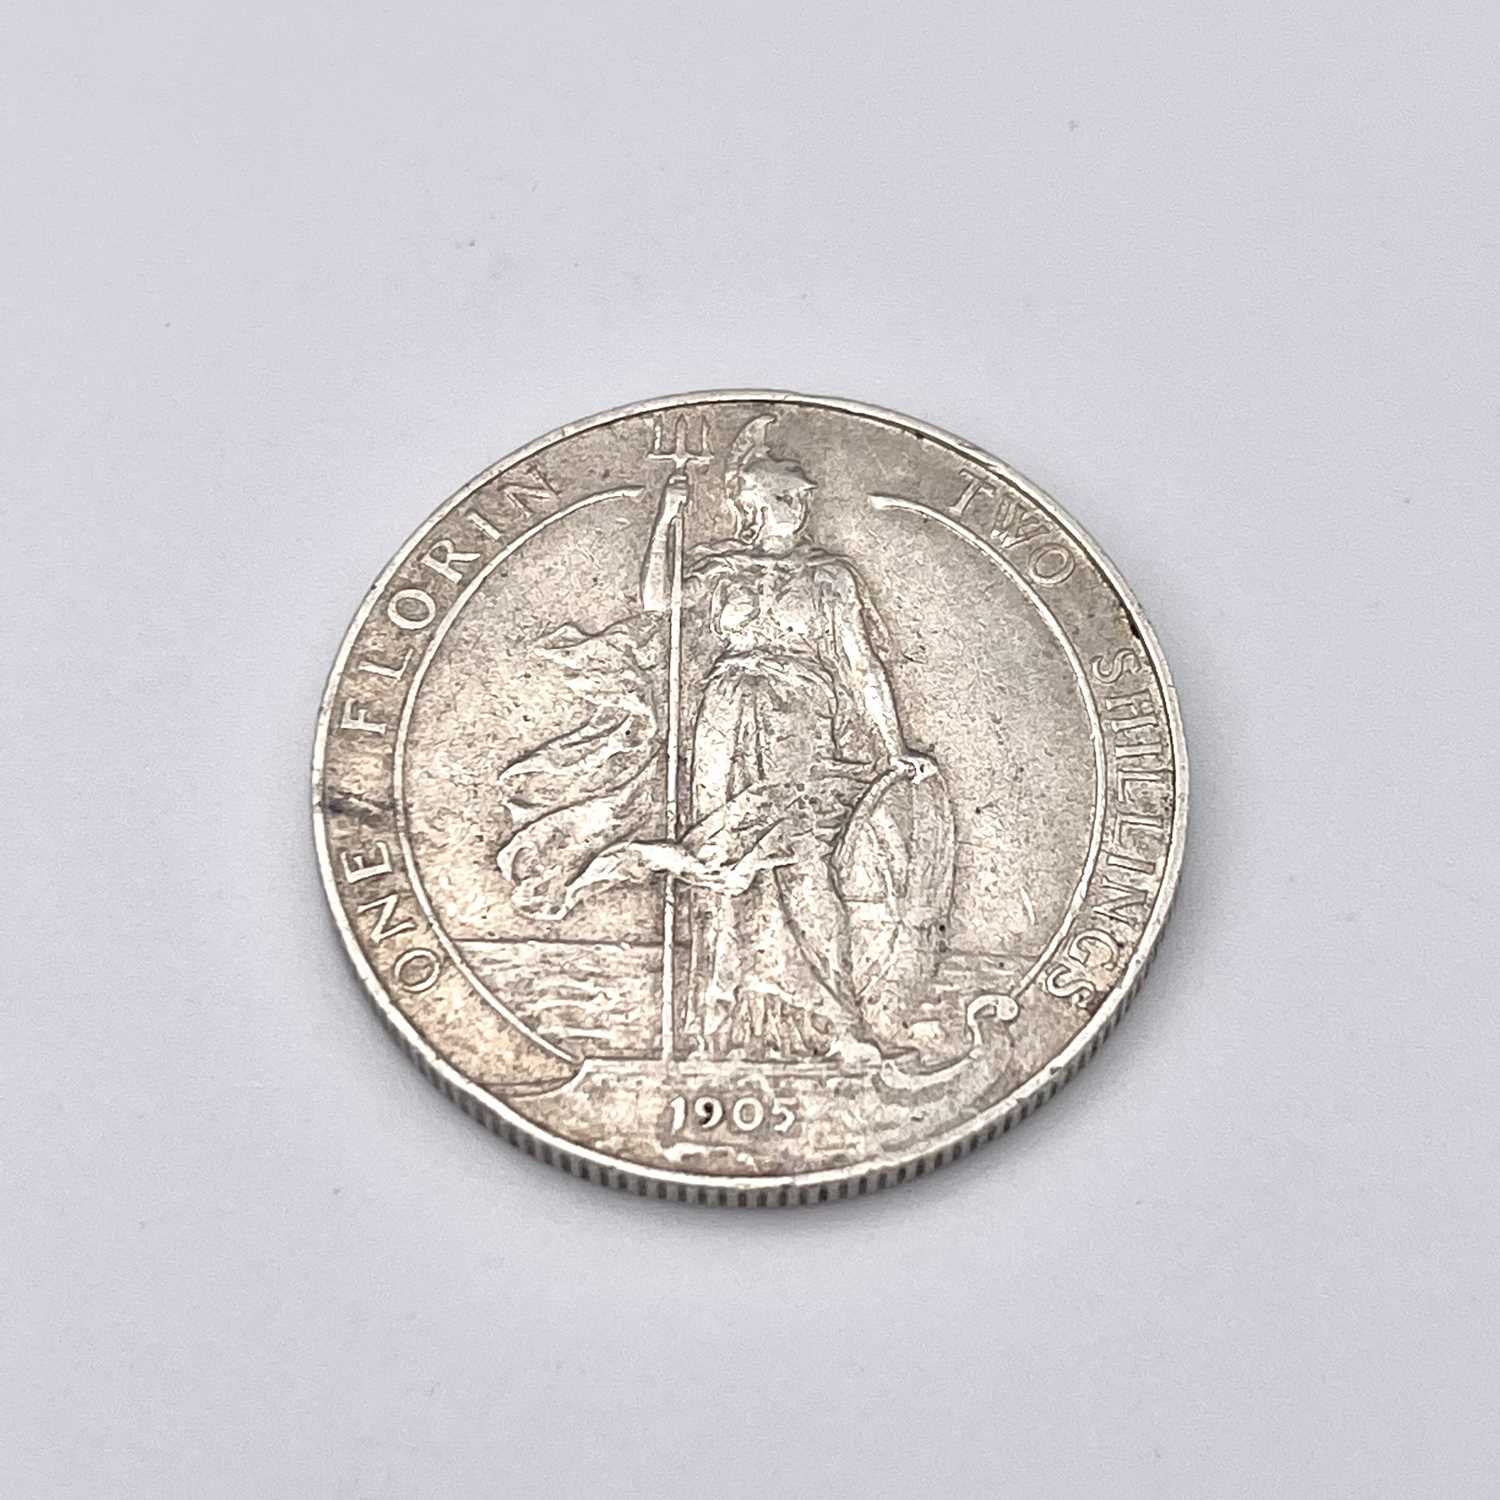 Great Britain King Edward VII 2/- coin RARE 1905 EXAMPLE (x1) Hard to find coin with clear date in